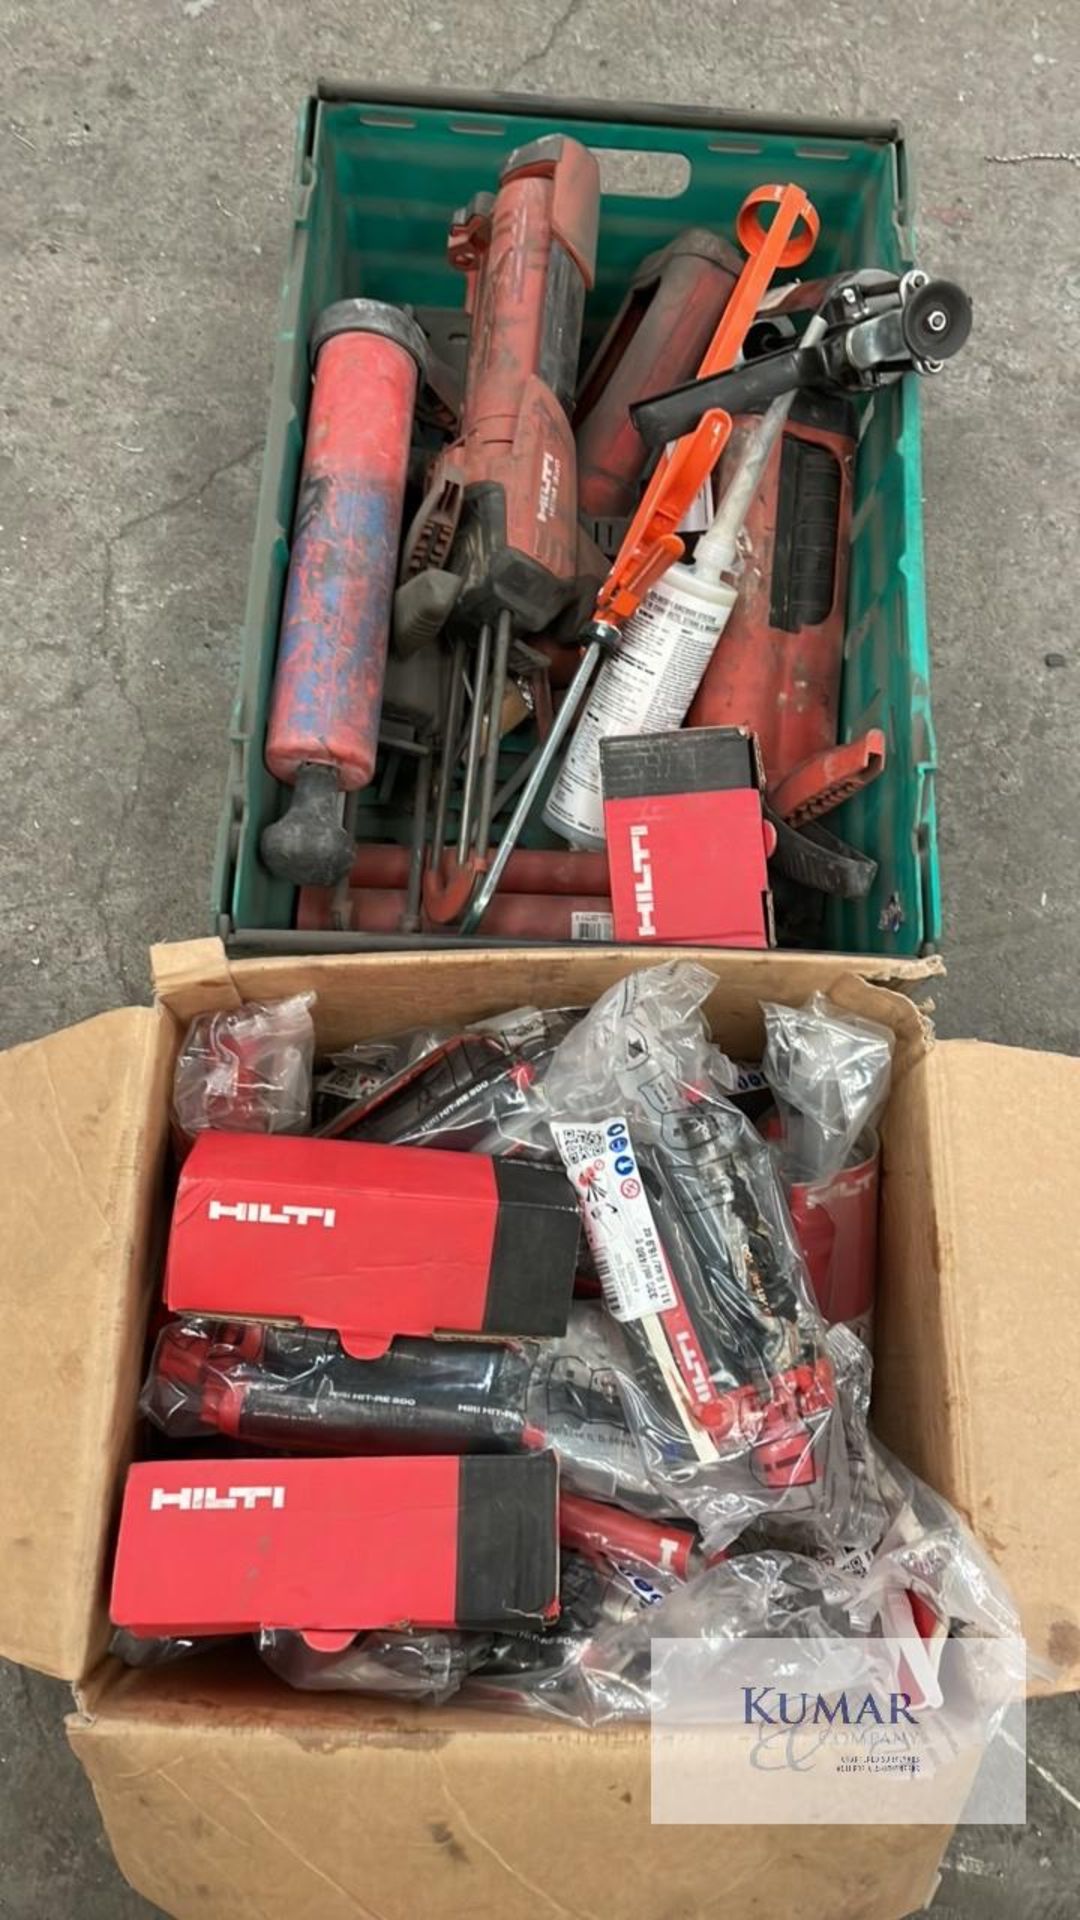 Hilti resin guns and resin refills and resin bolts